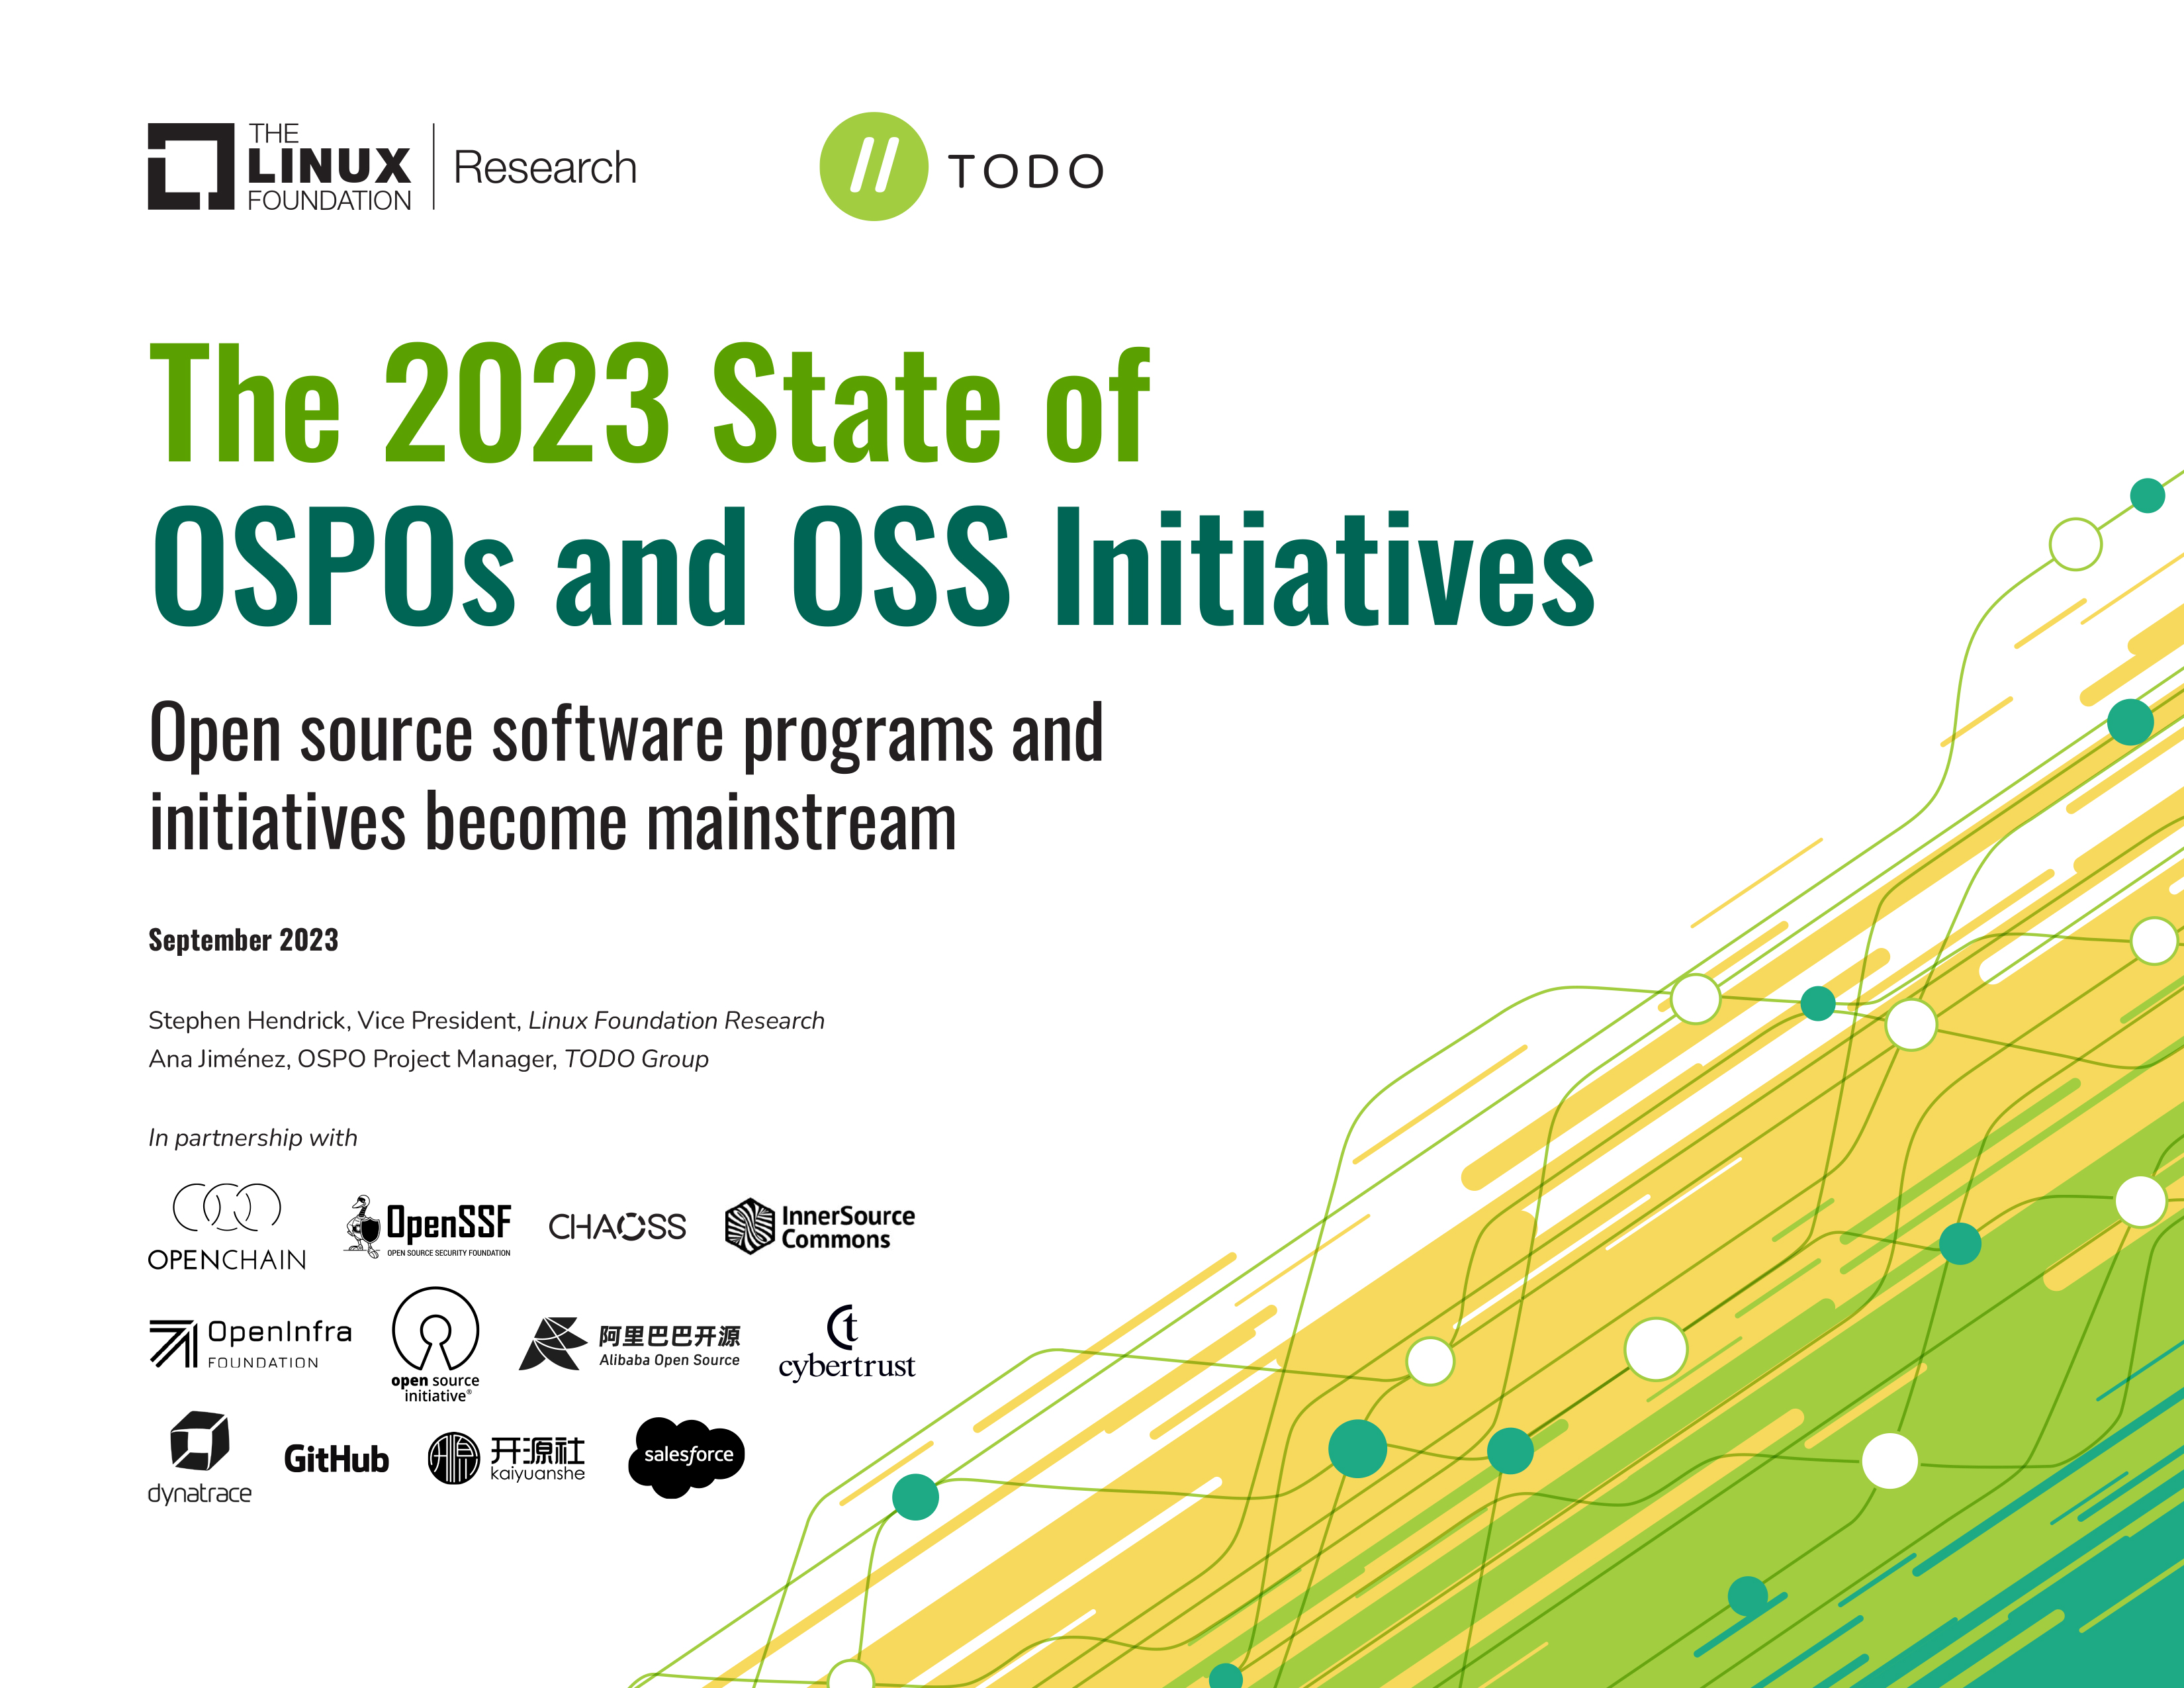 The 2023 State of OSPOs and OSS Initiatives Featured Image 2